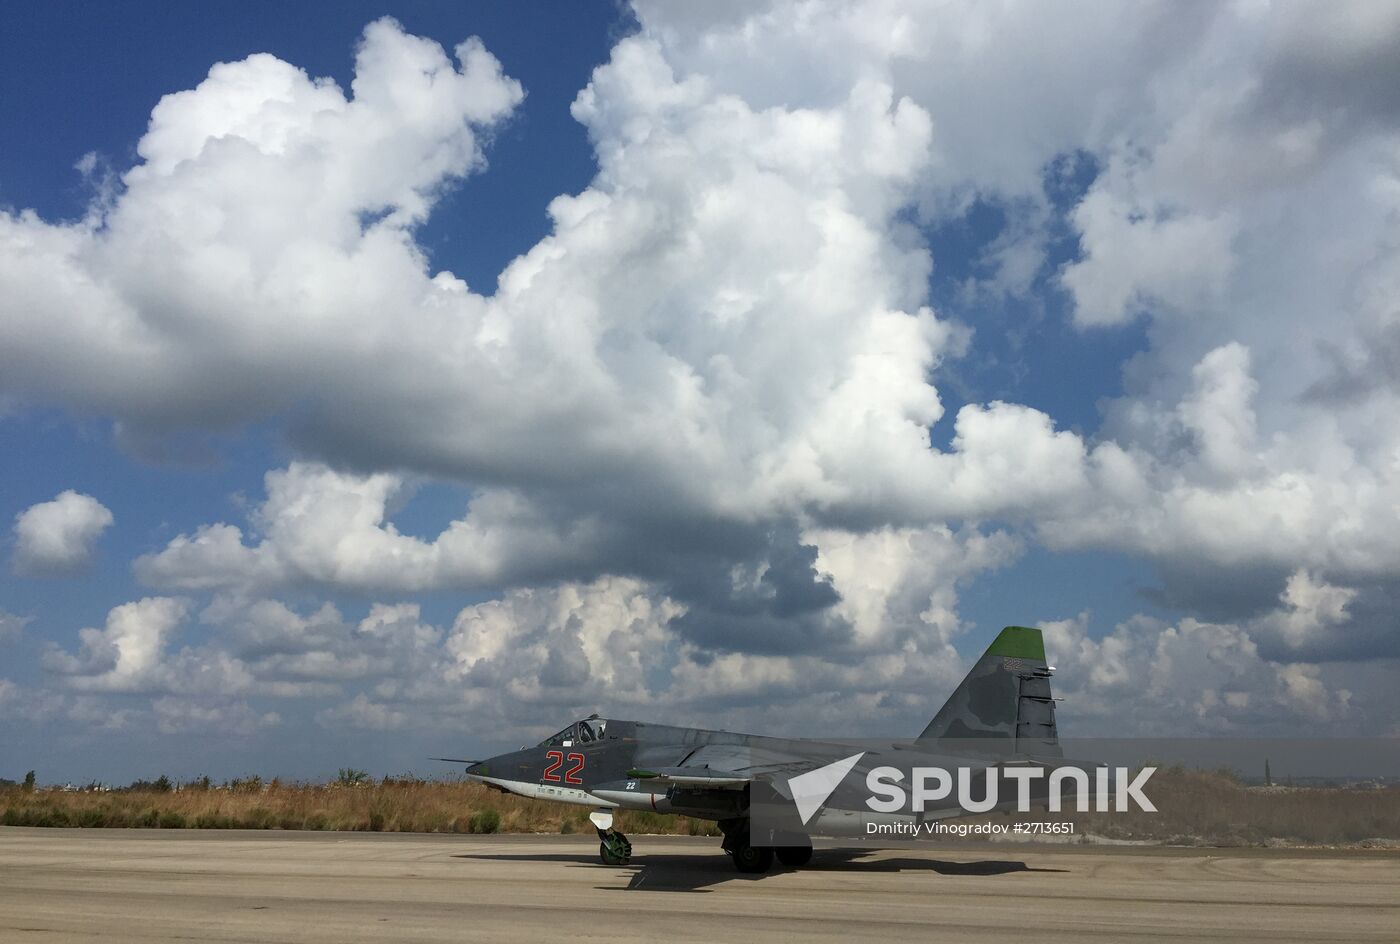 Russian military aircraft at Syria's Hmeimim airfield